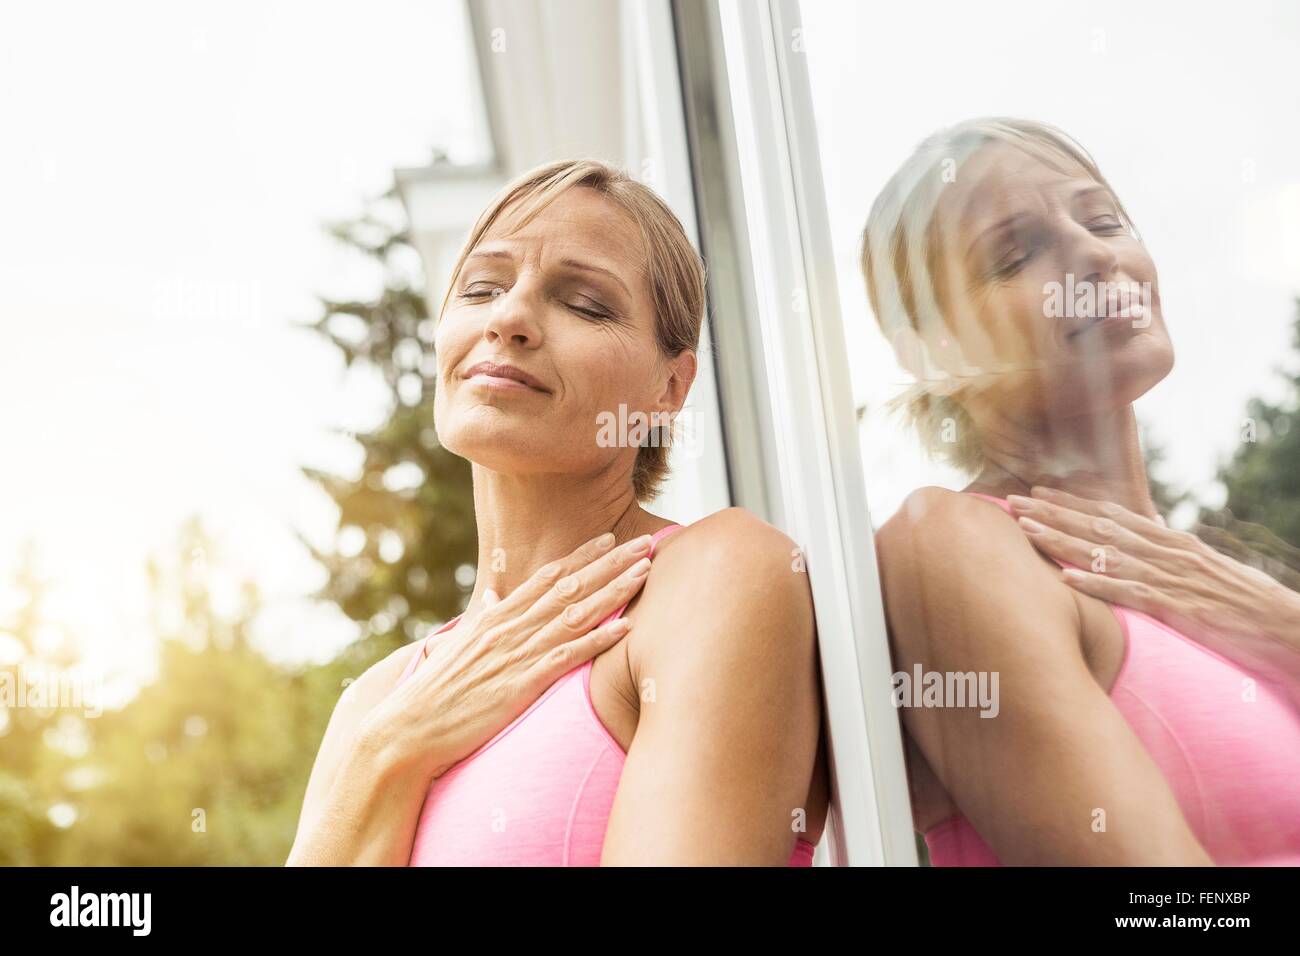 Exhausted mature female runner leaning against patio door Stock Photo